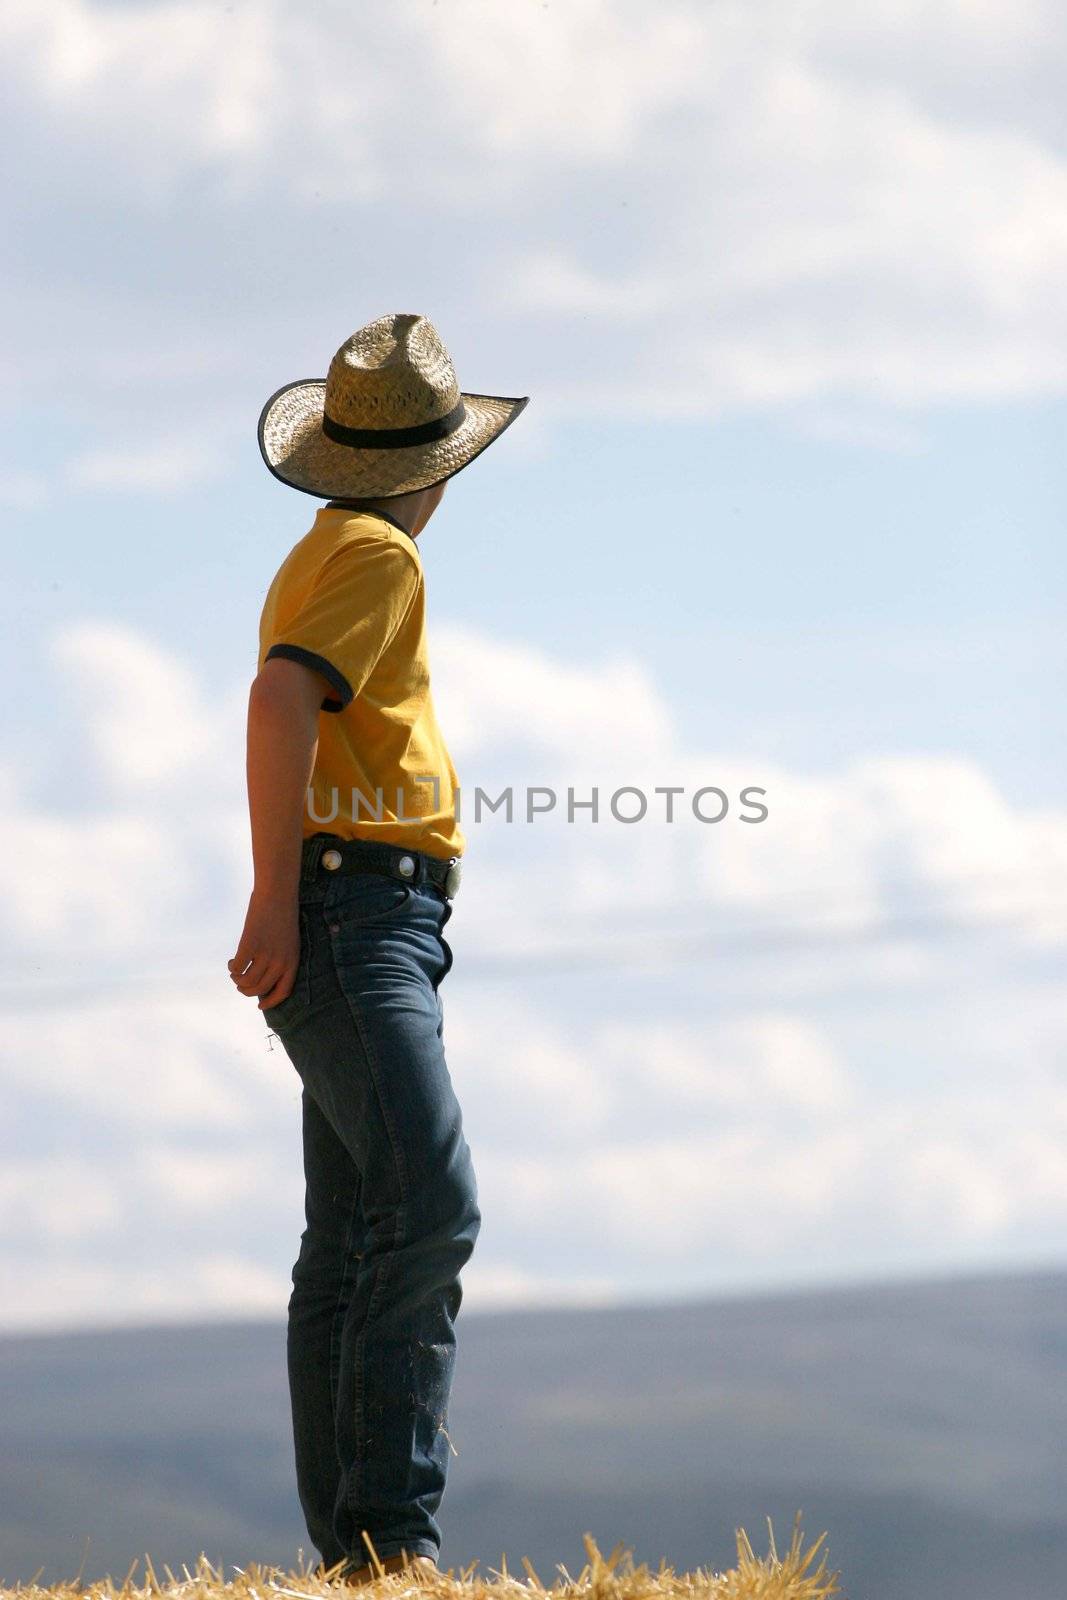 Male cowboy standing on straw stack looking away into the distance with yellow shirt, blue jeans, and hat